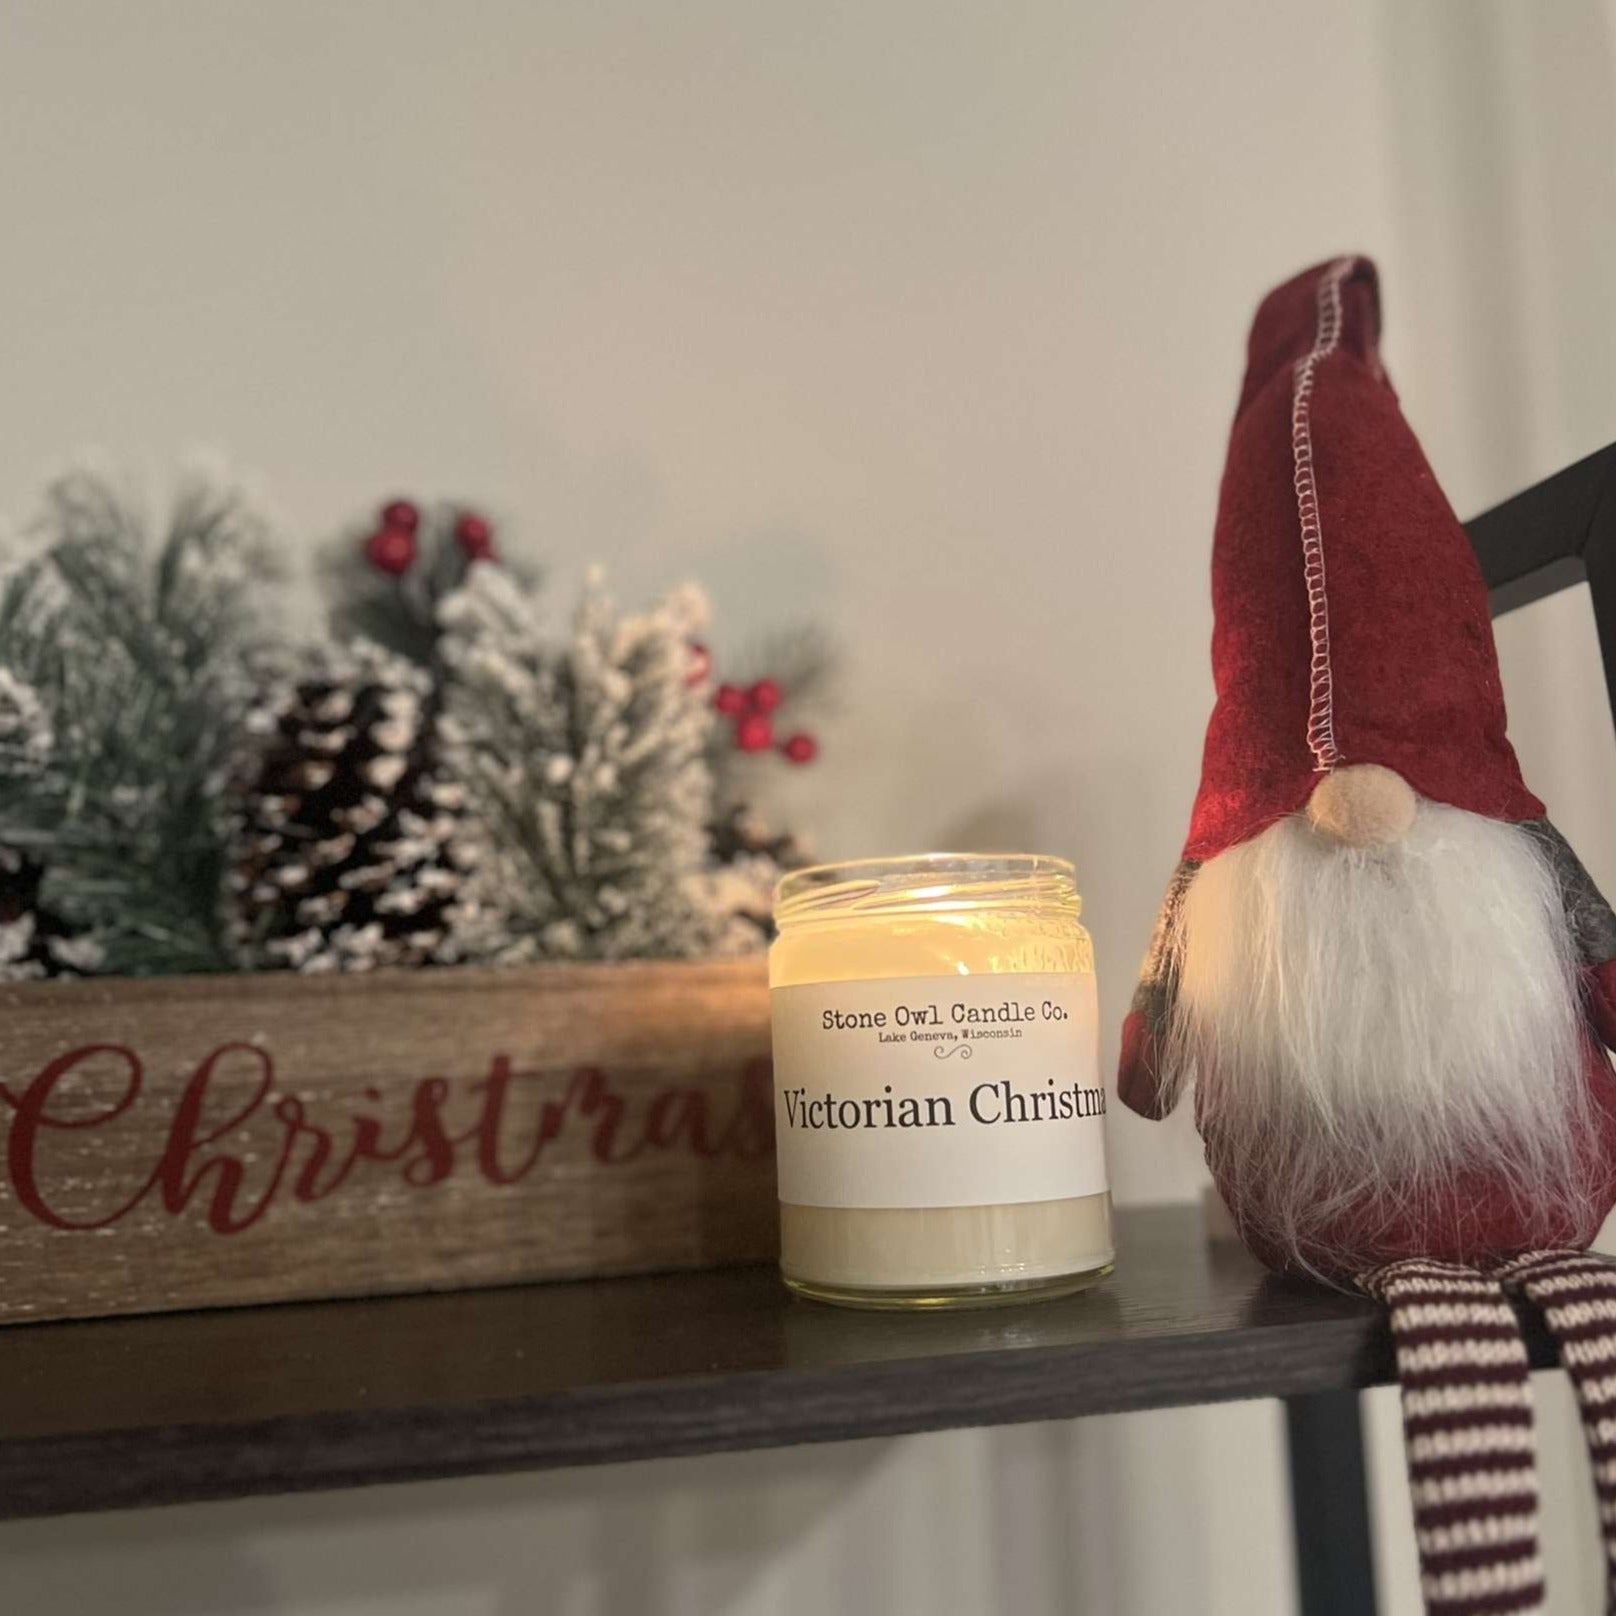 Stone Owl Candle Co. Victorian Christmas Candle